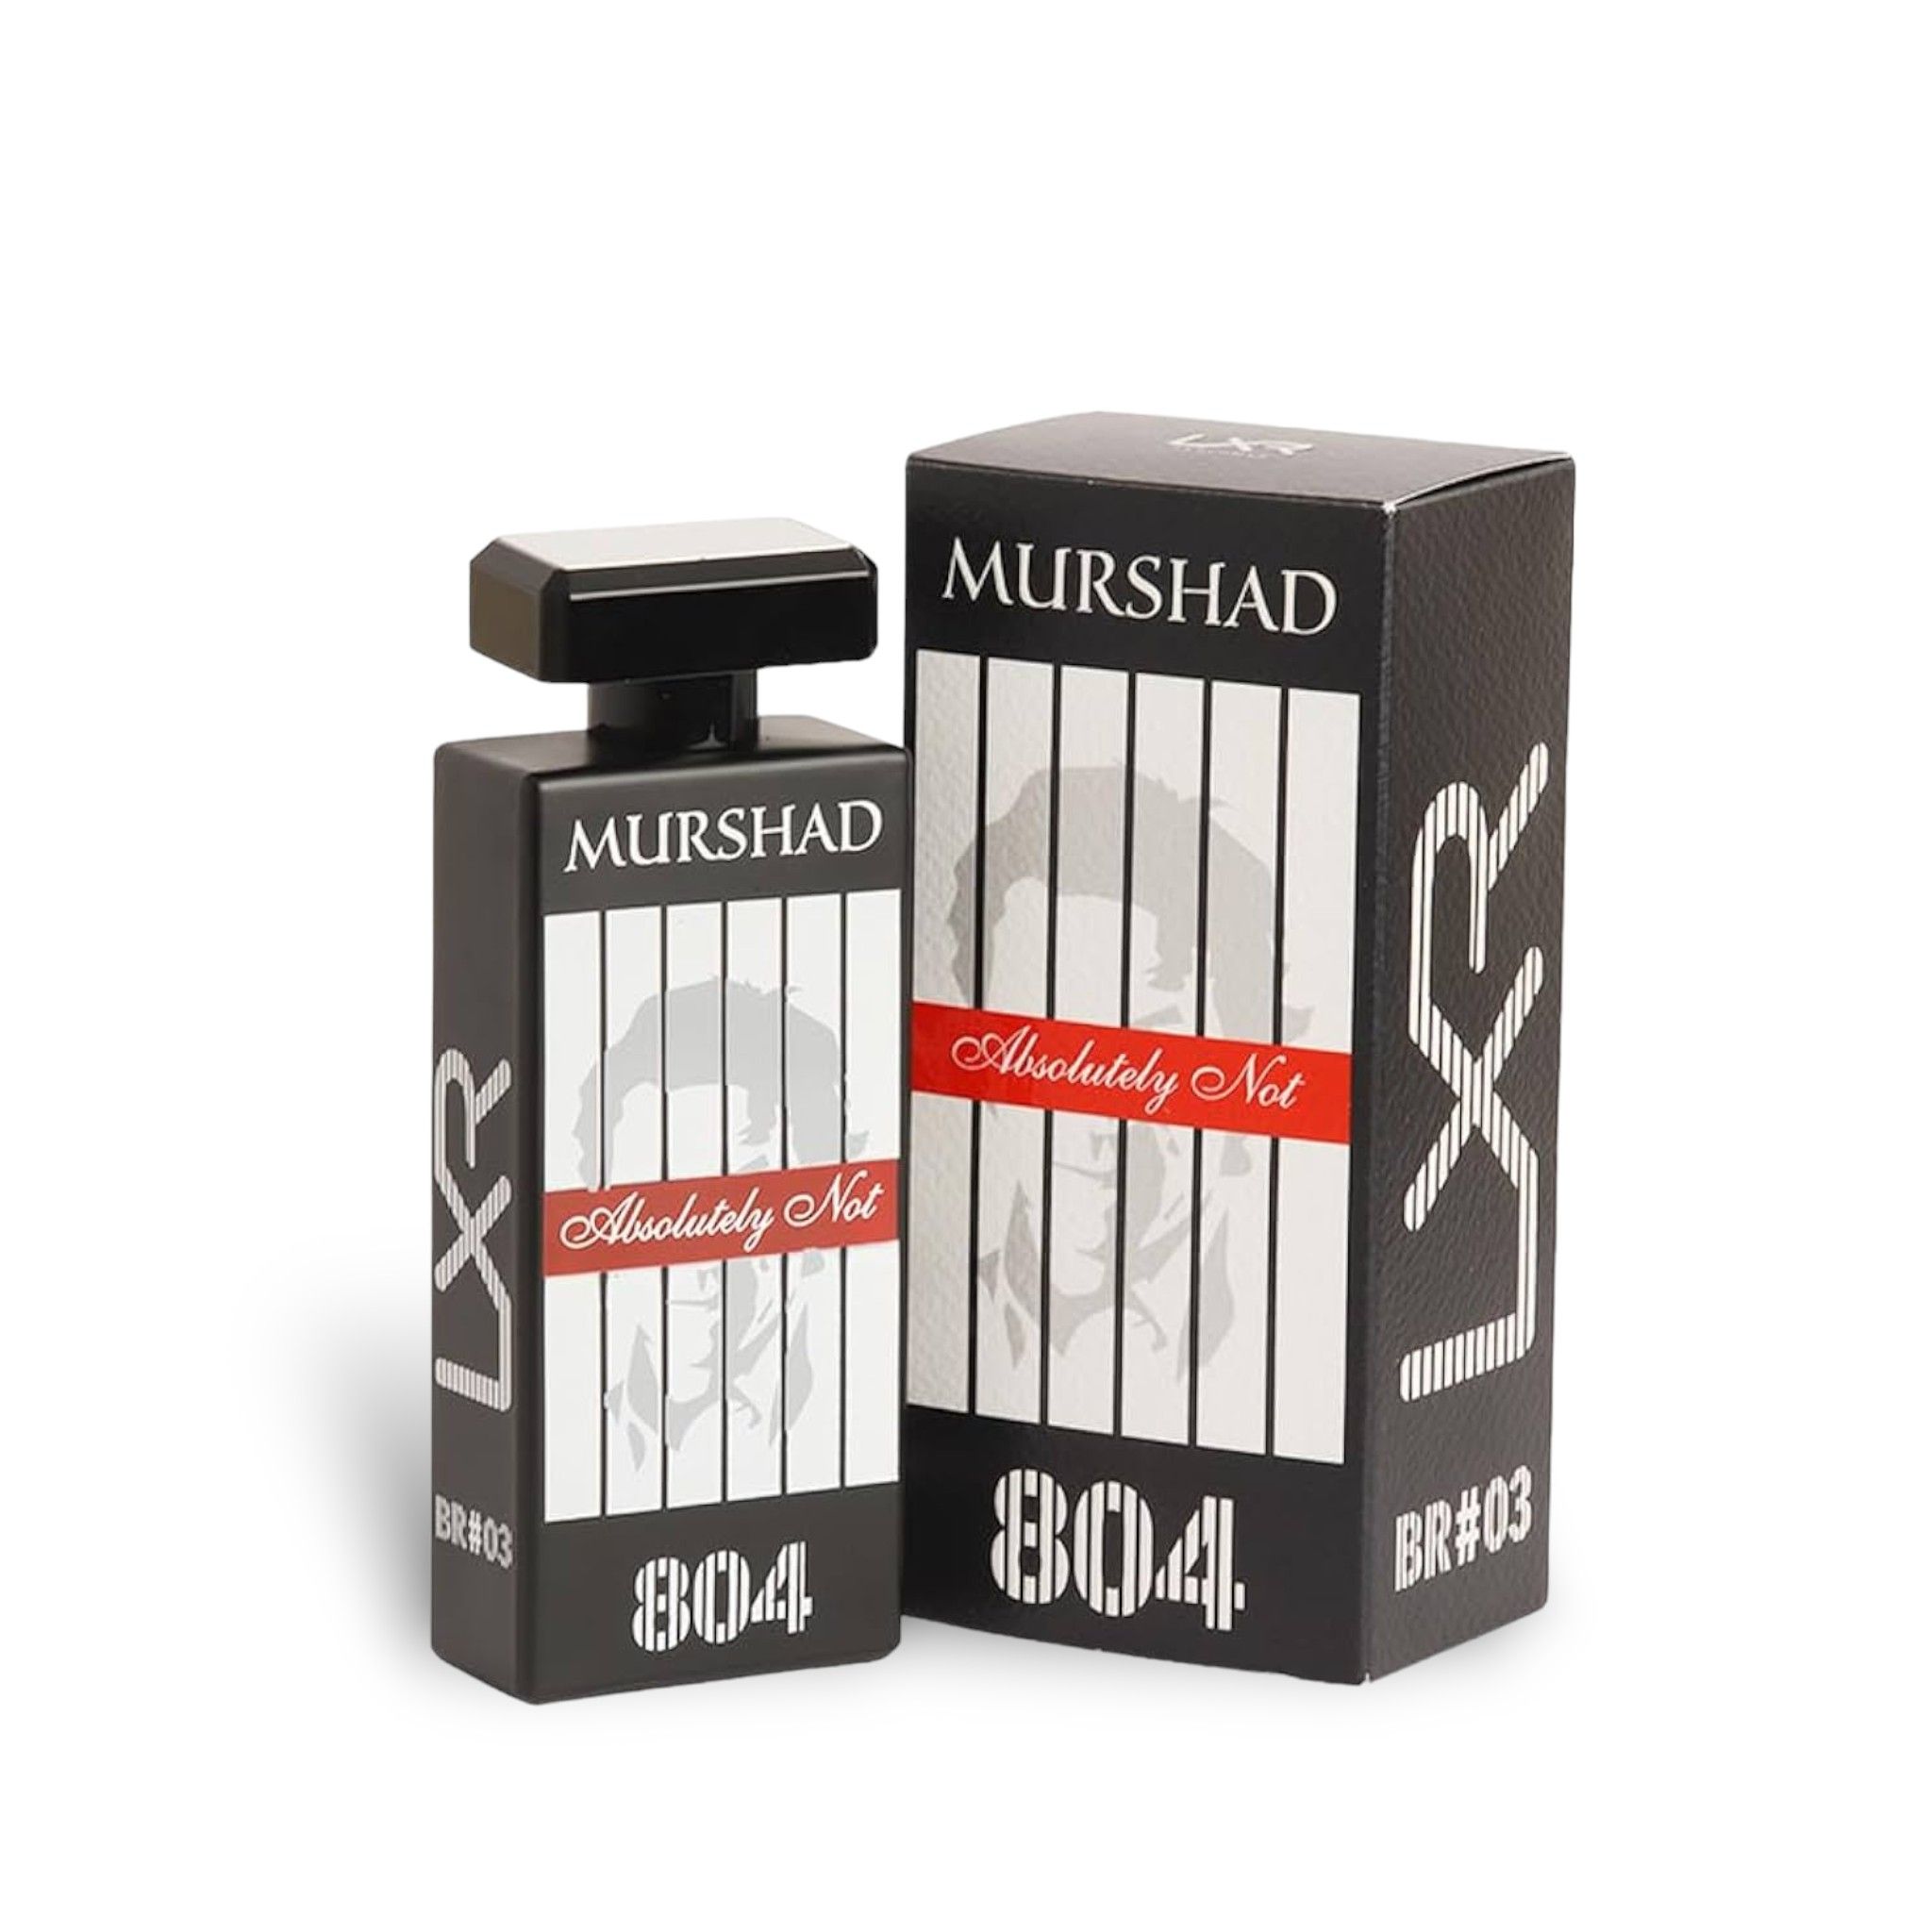 Murshad Absolutely Not 804 100Ml Edp By Lxr